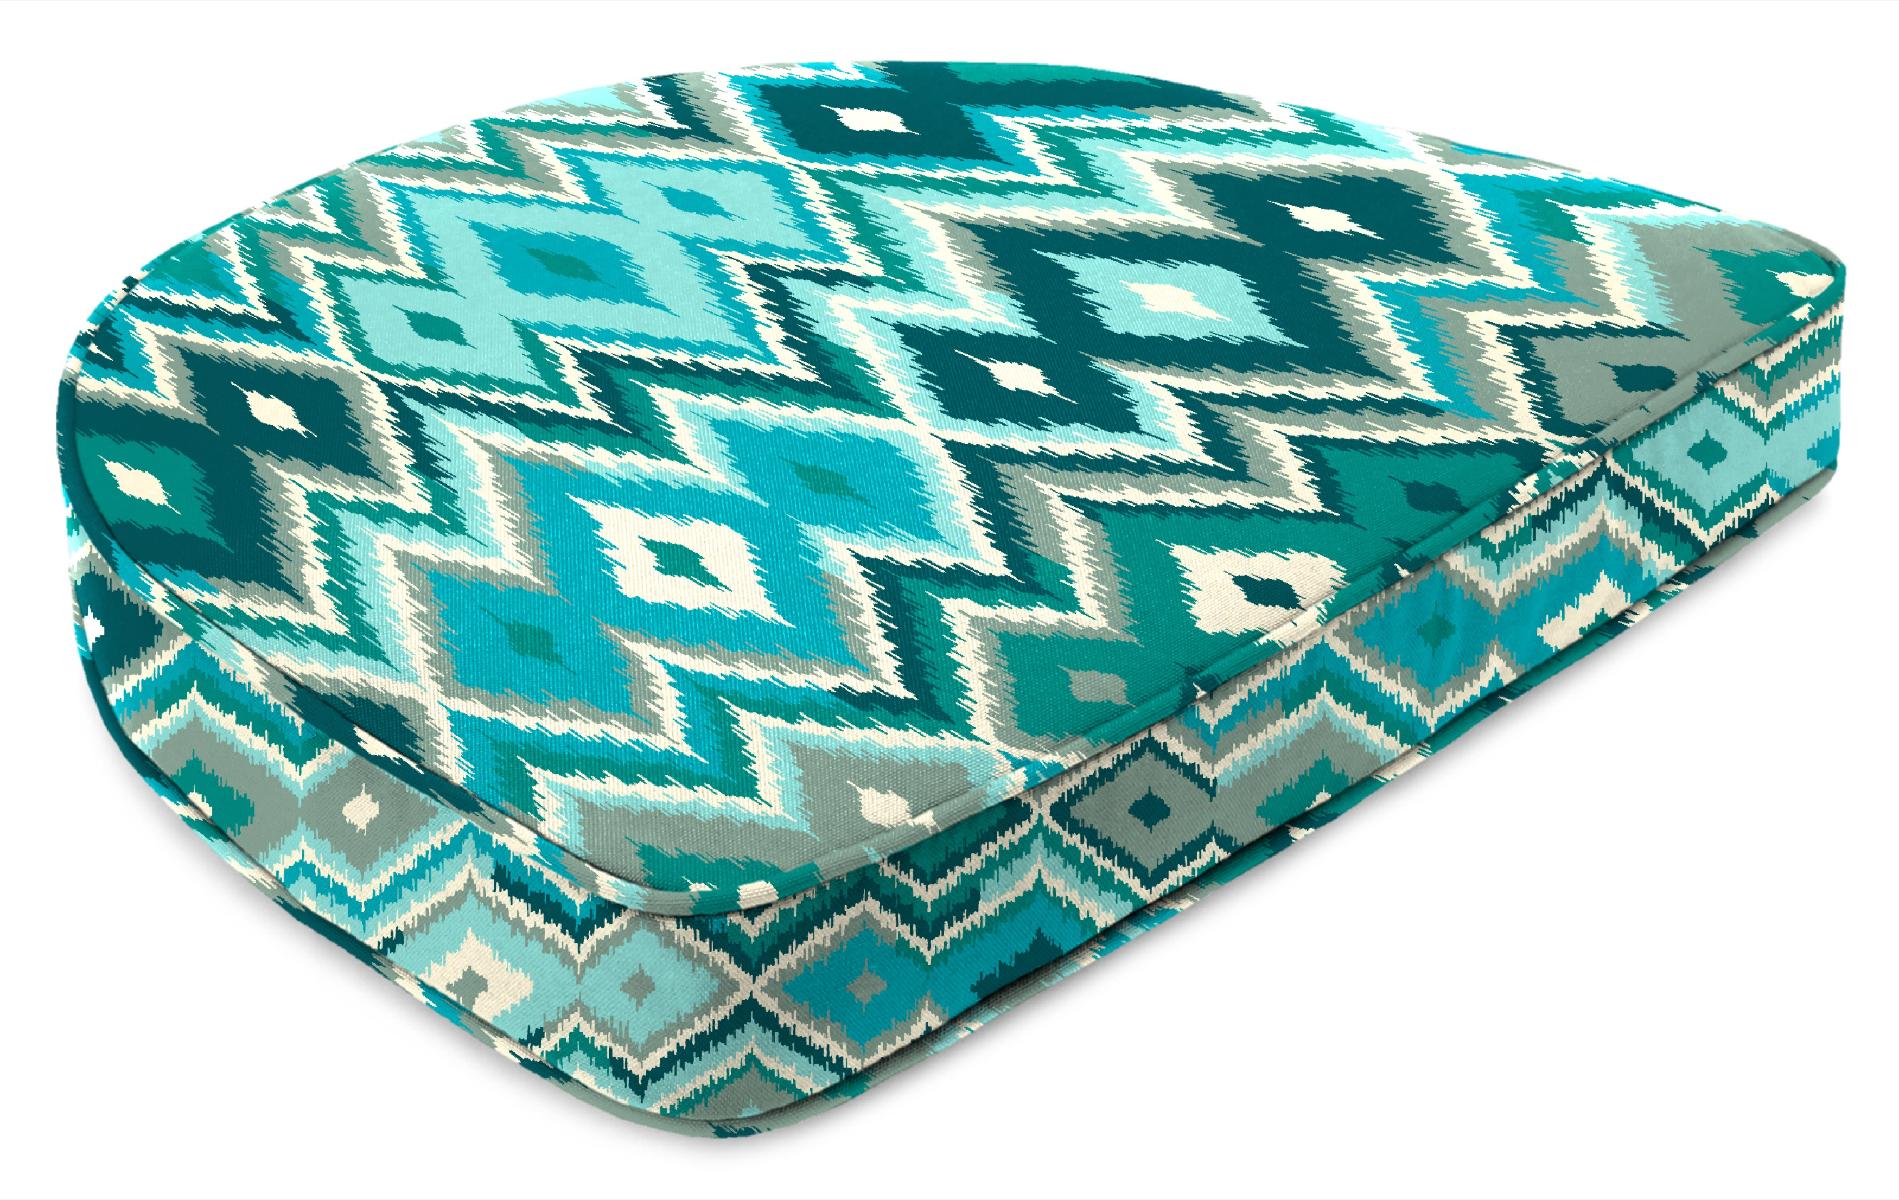 Contoured Boxed Chair Cushion in Marva Peacock